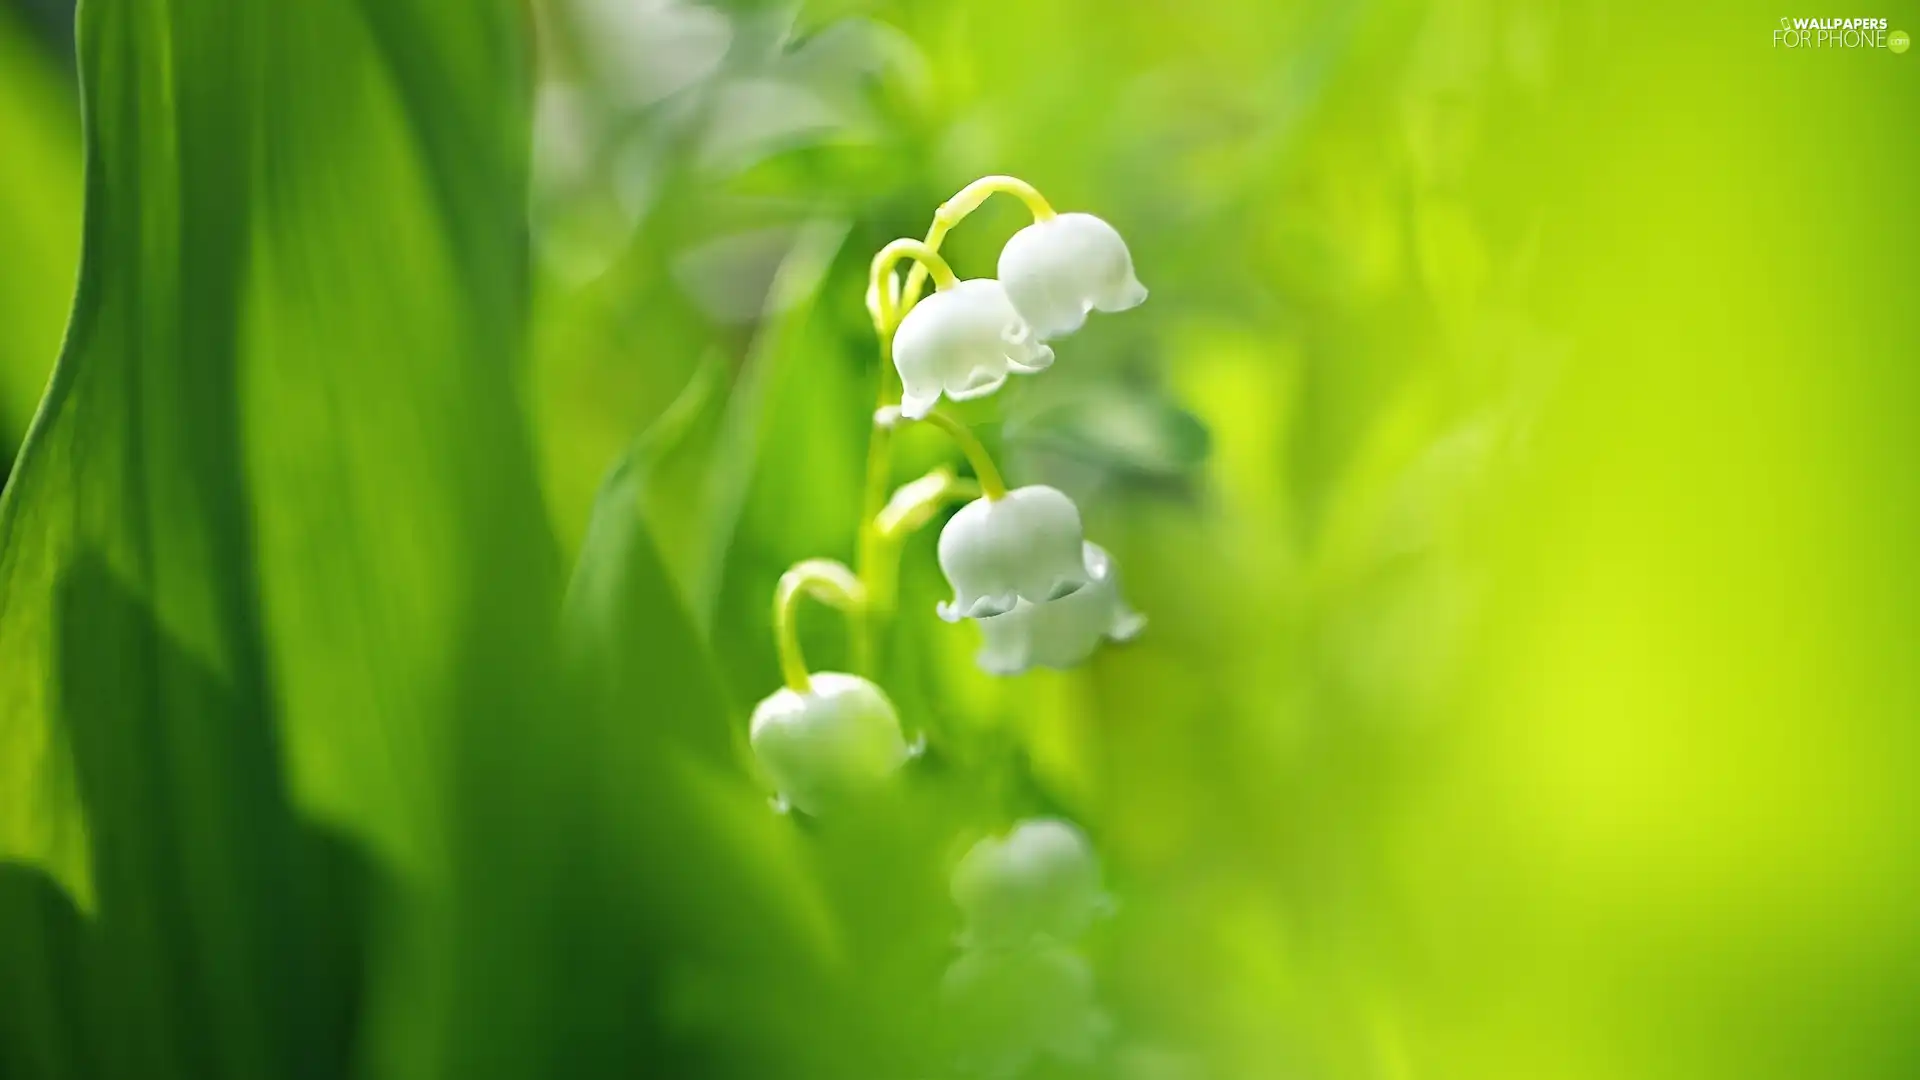 Colourfull Flowers, Leaf, Green Background, lily of the Valley